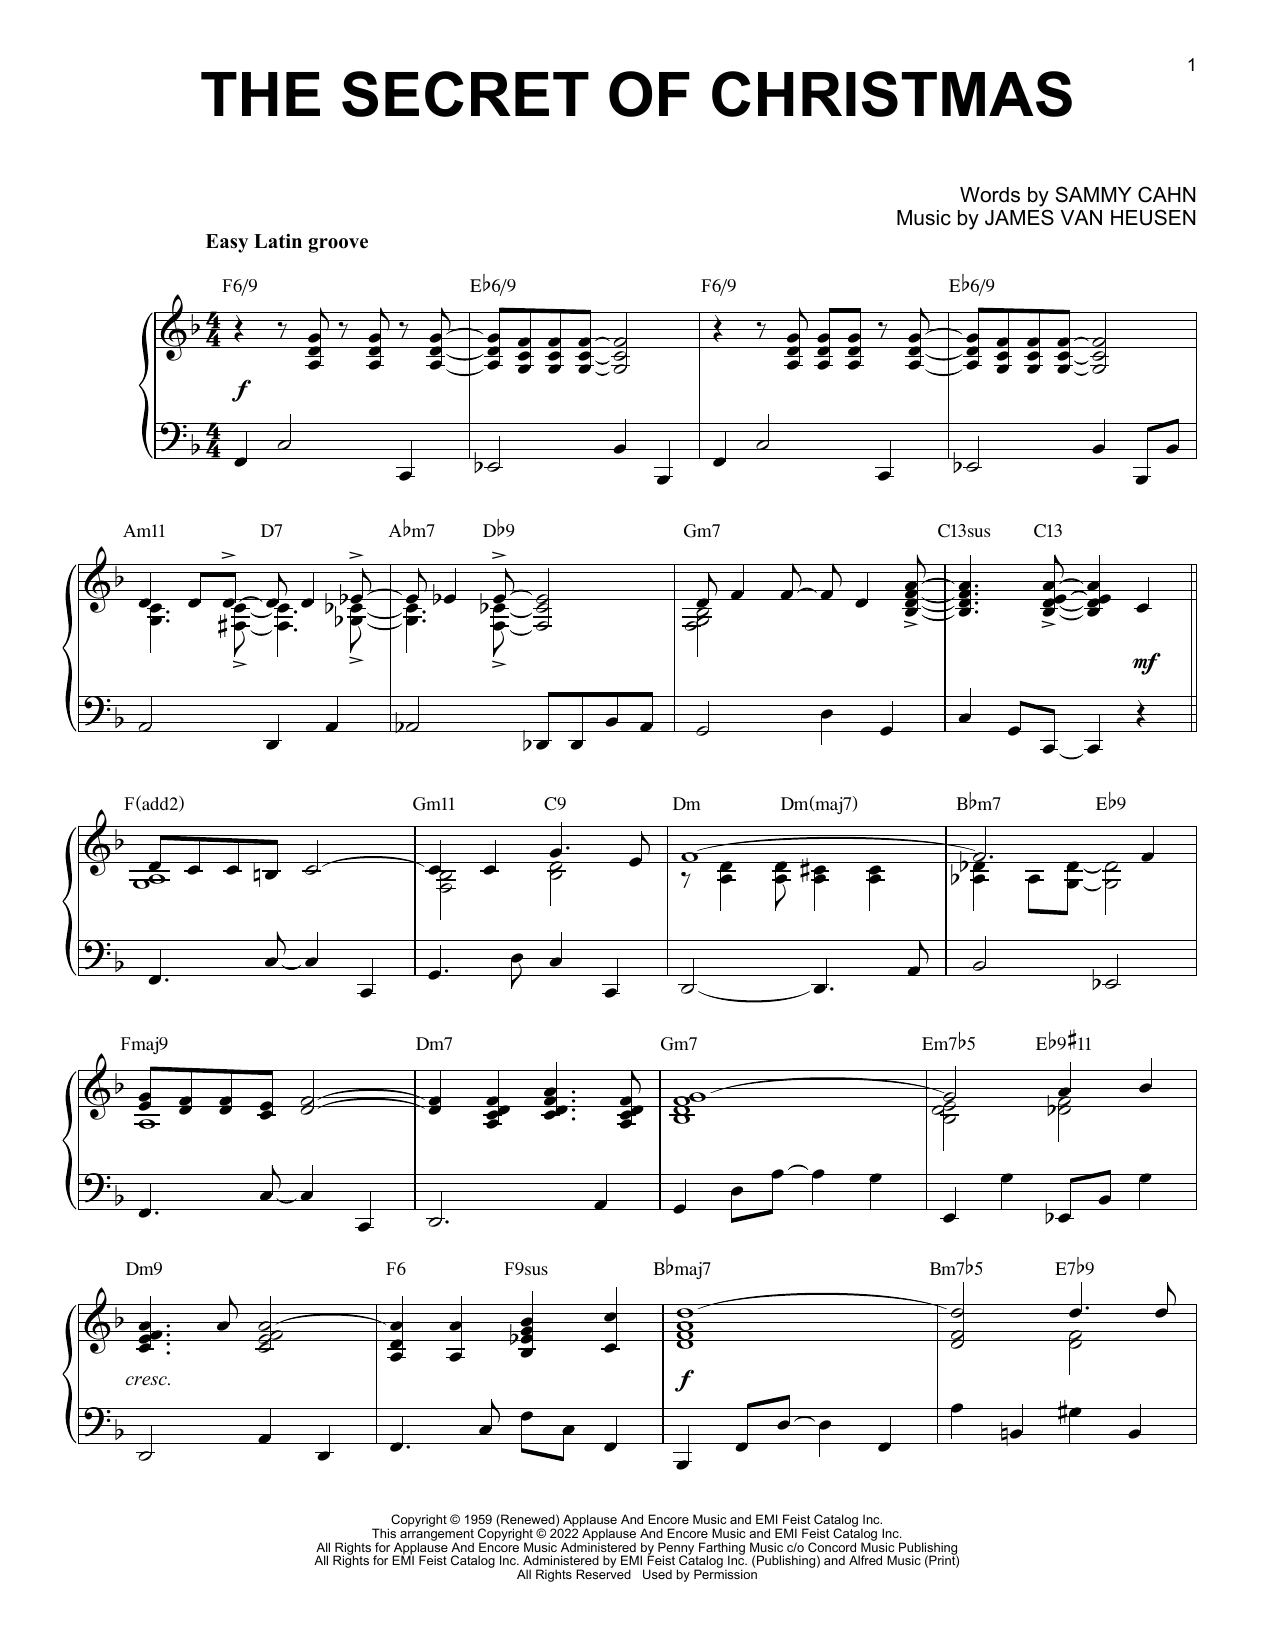 Bing Crosby The Secret Of Christmas (arr. Brent Edstrom) sheet music notes and chords. Download Printable PDF.